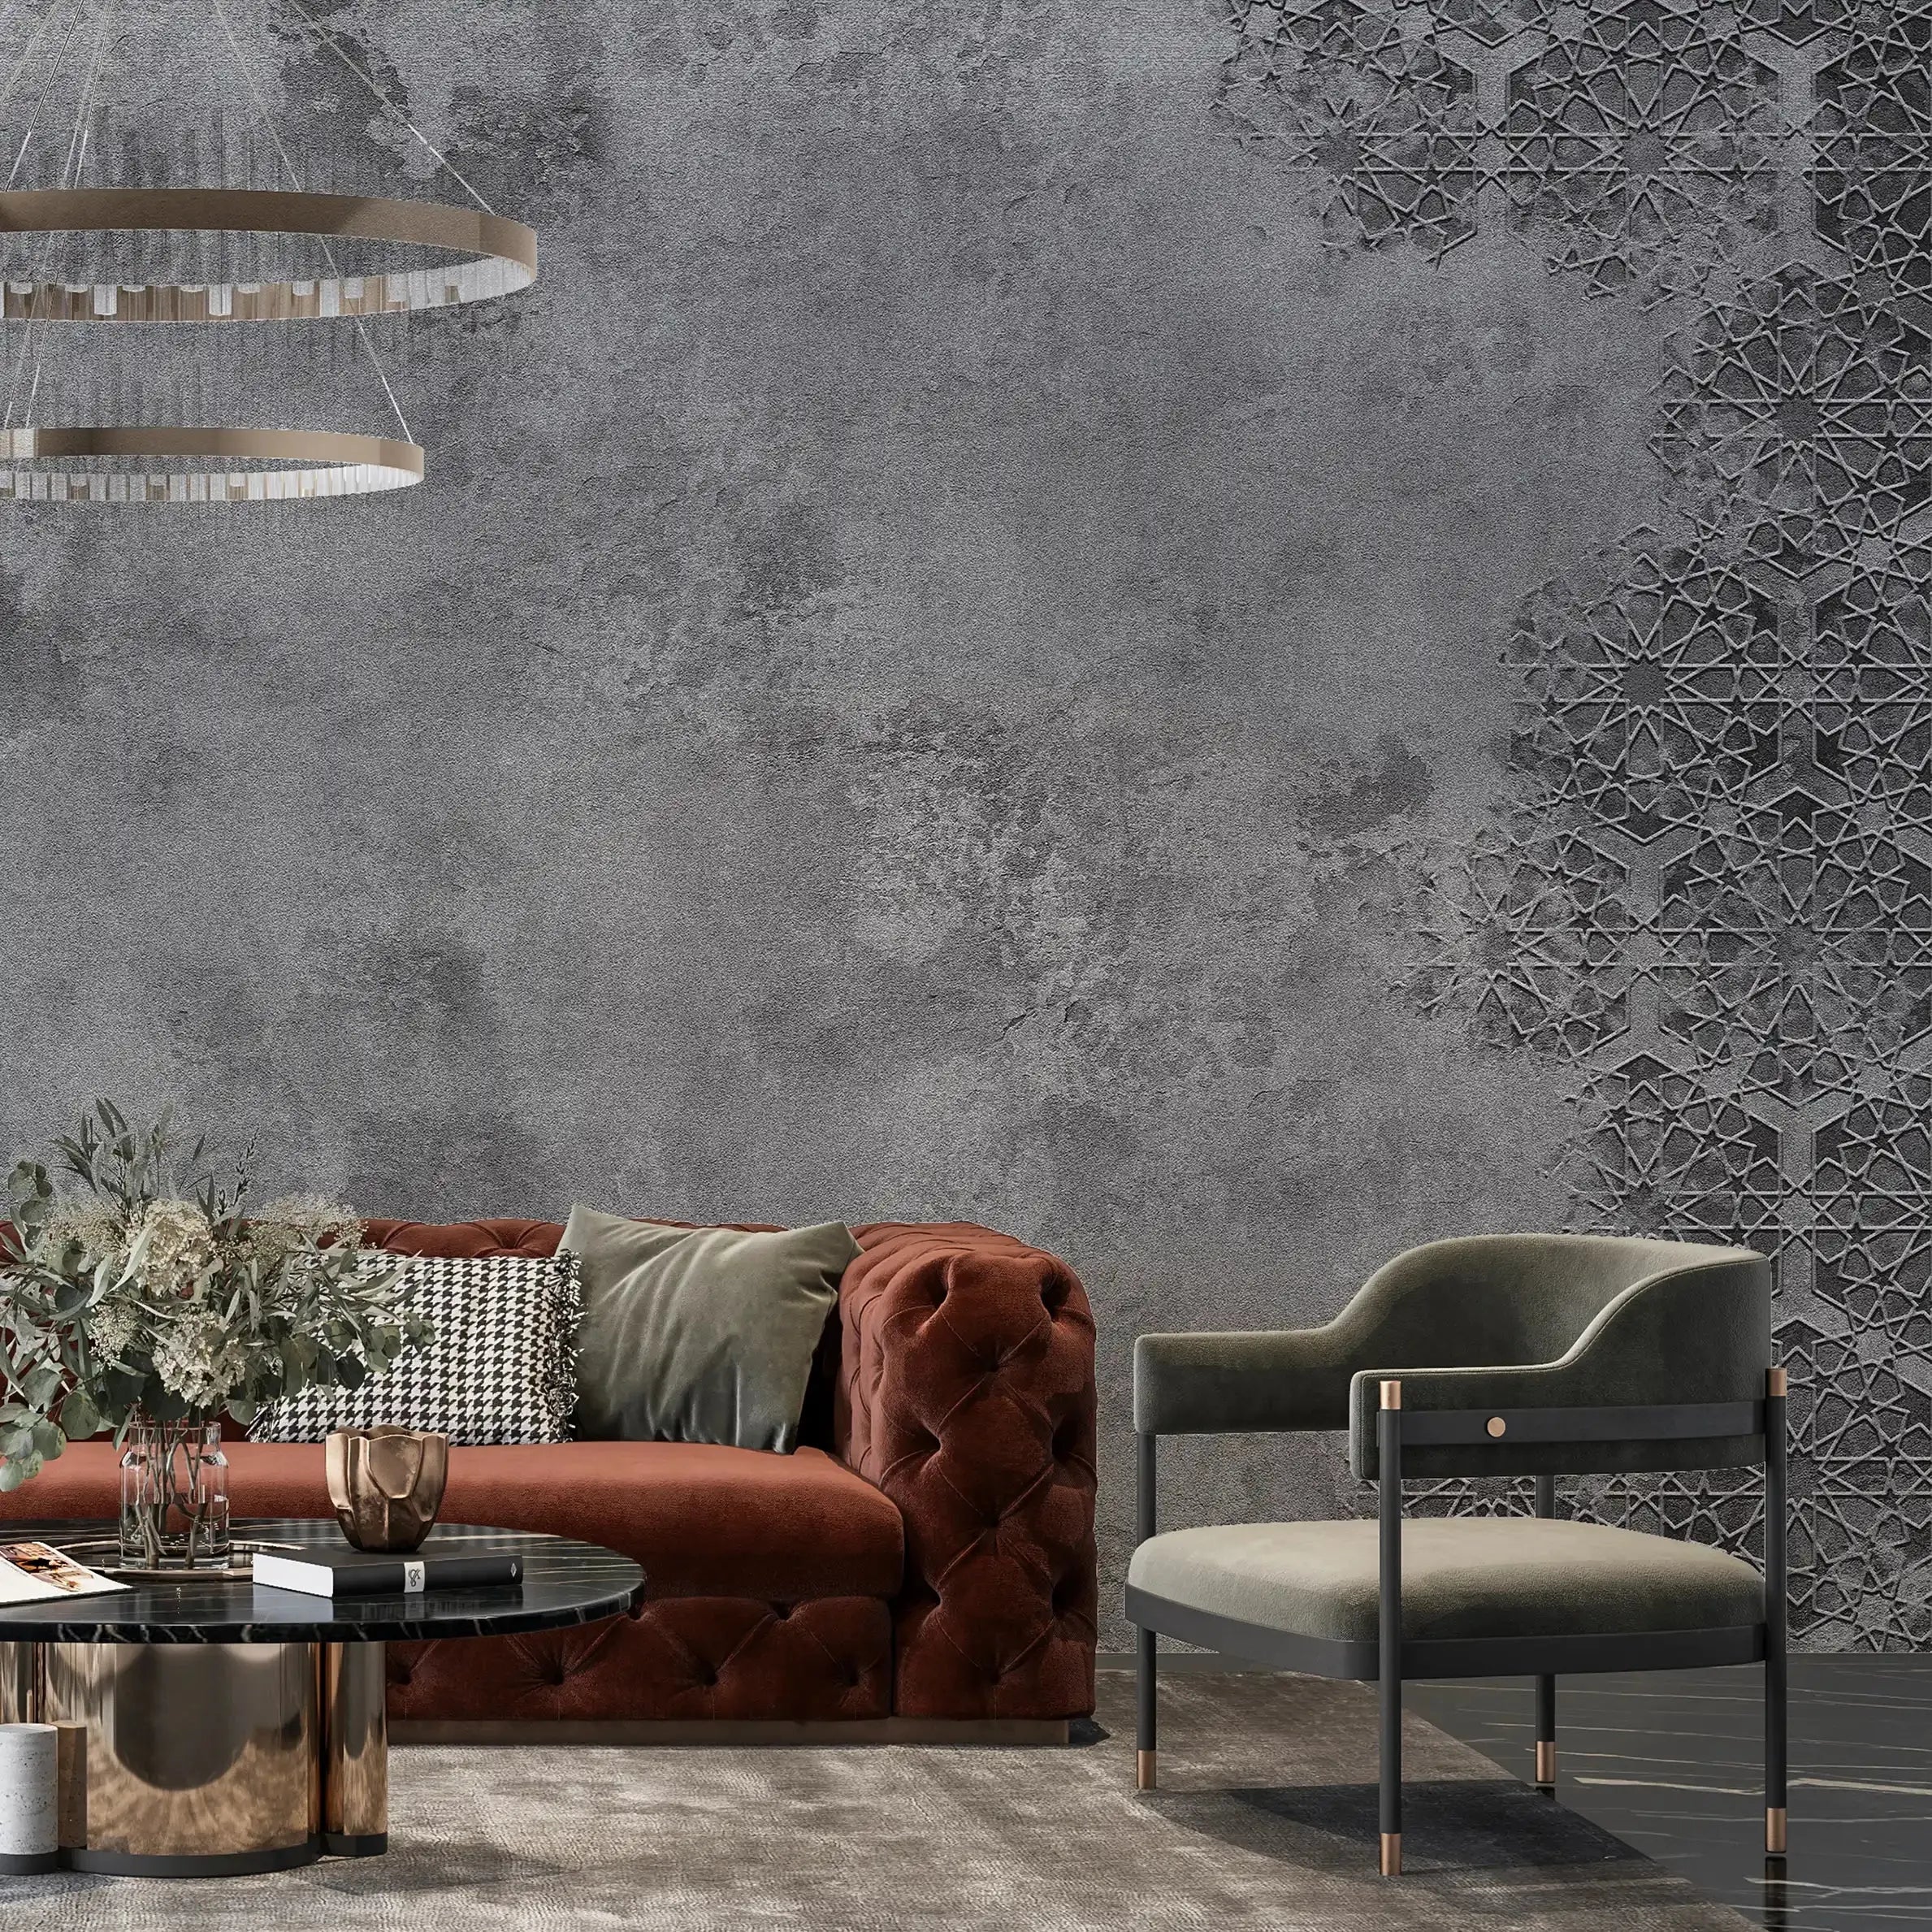 3068-E / Elegant Floral Abstract Peel and Stick Wallpaper with Grey Border - Perfect for Modern Room Deco - Artevella